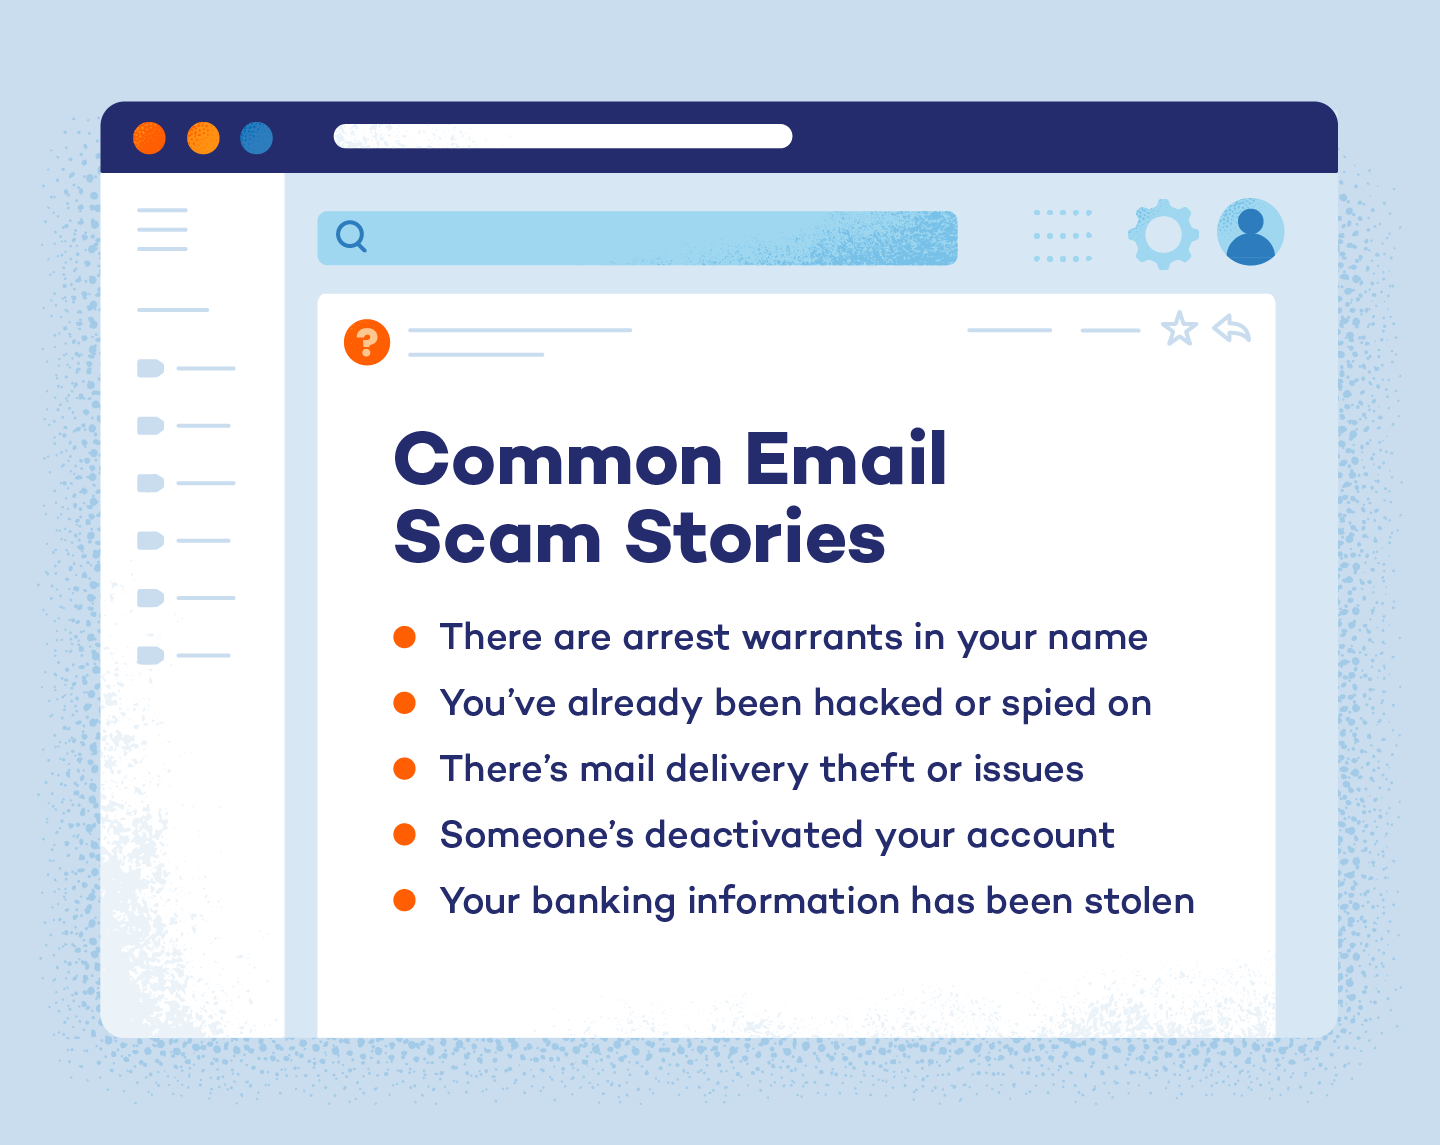 Cartoon email screen relaying a few common email scam stories.